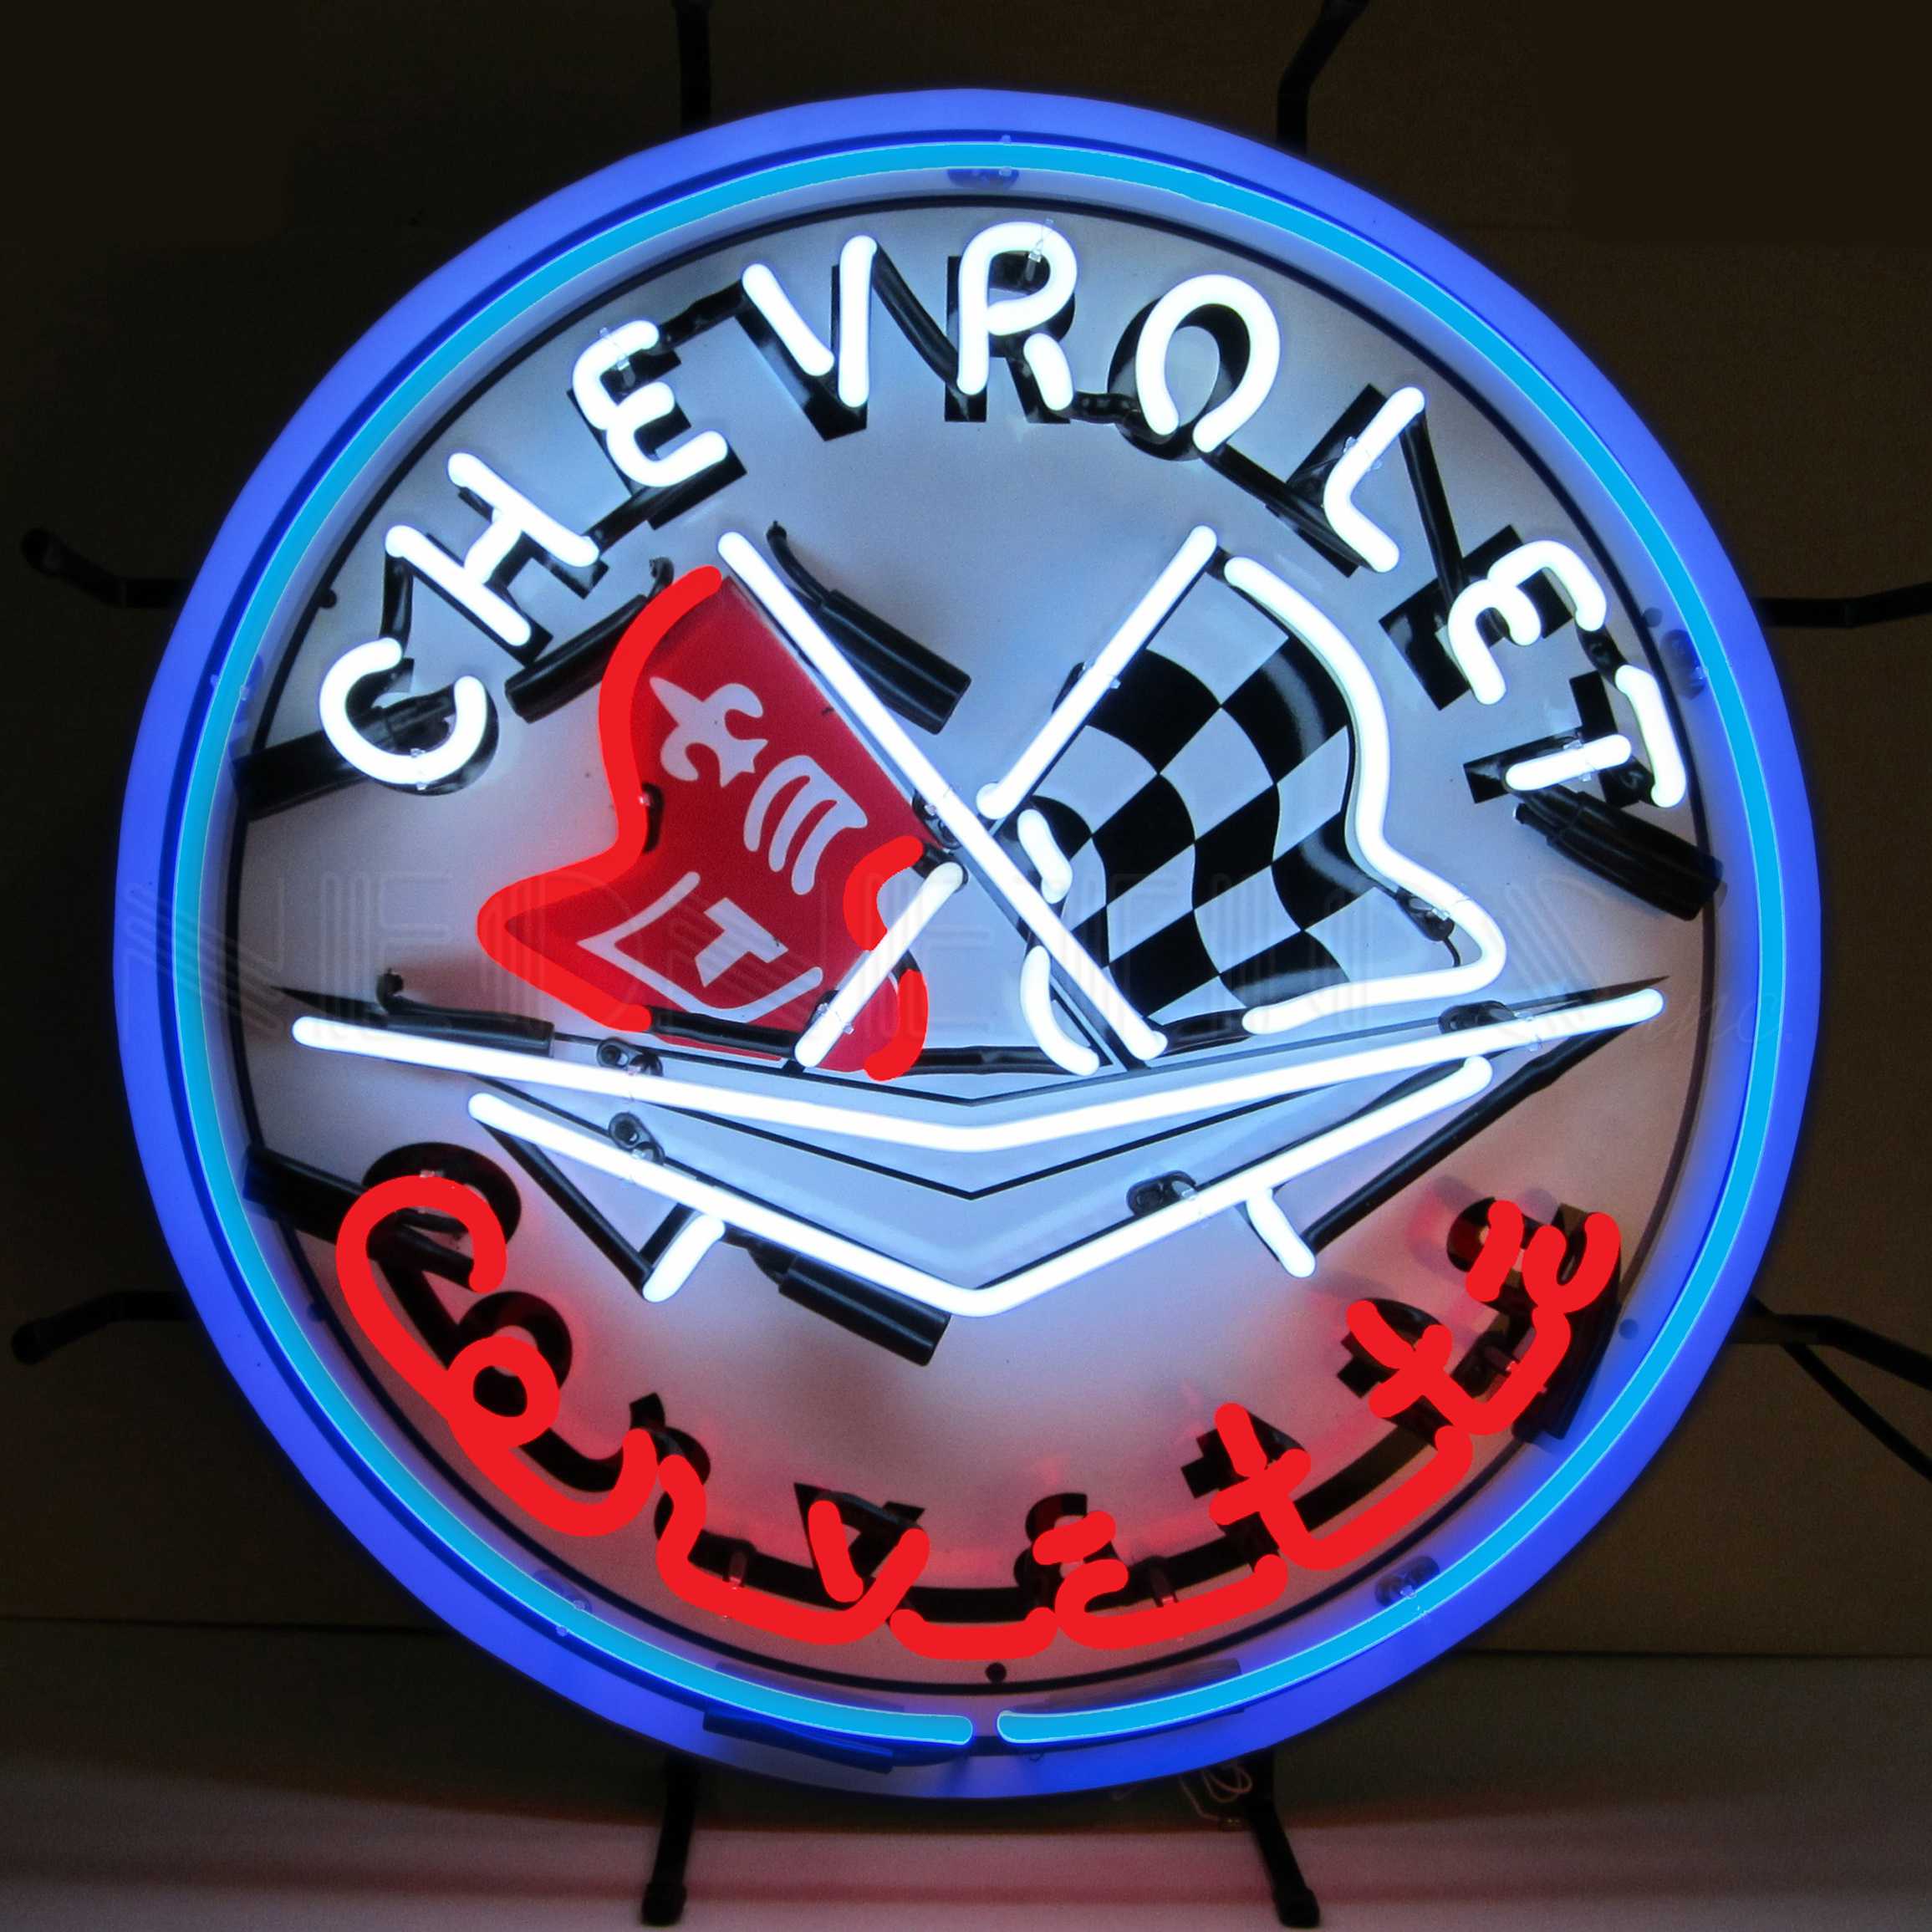 CORVETTE NEON SIGN WITH BLUE OUTER RING